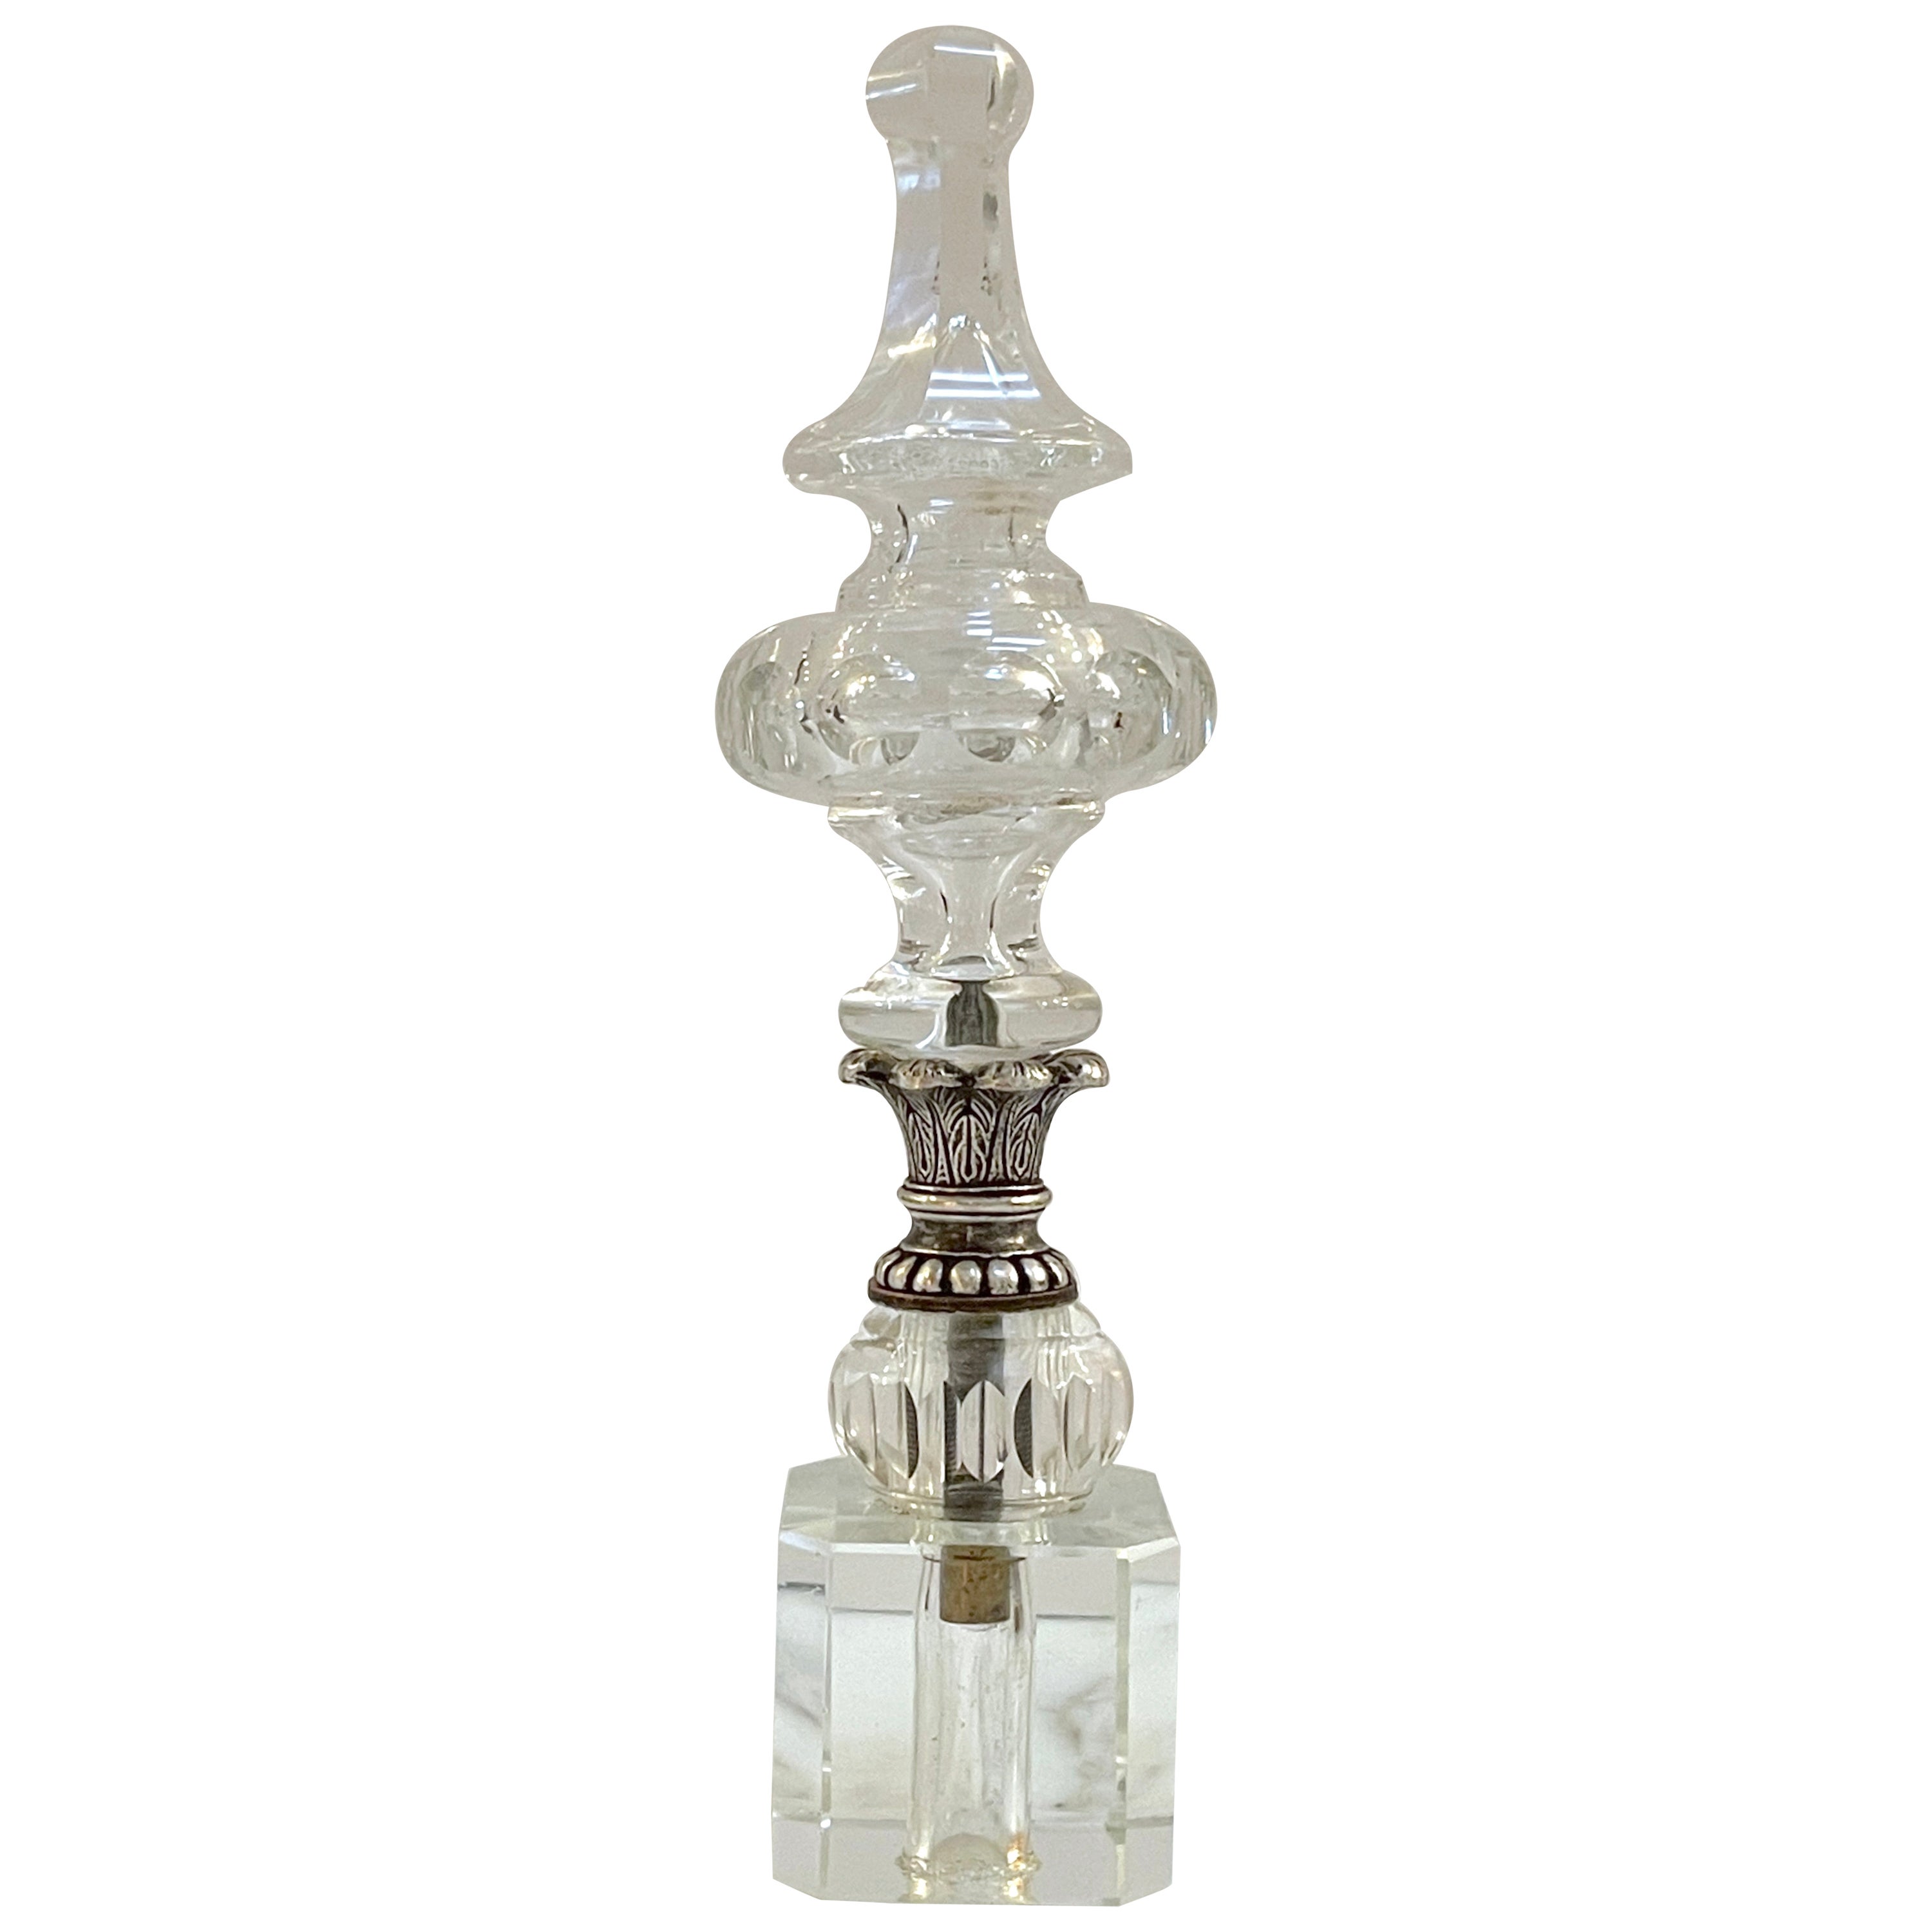 French Neoclassical Silverplated Bronze Mounted Crystal Newel Post